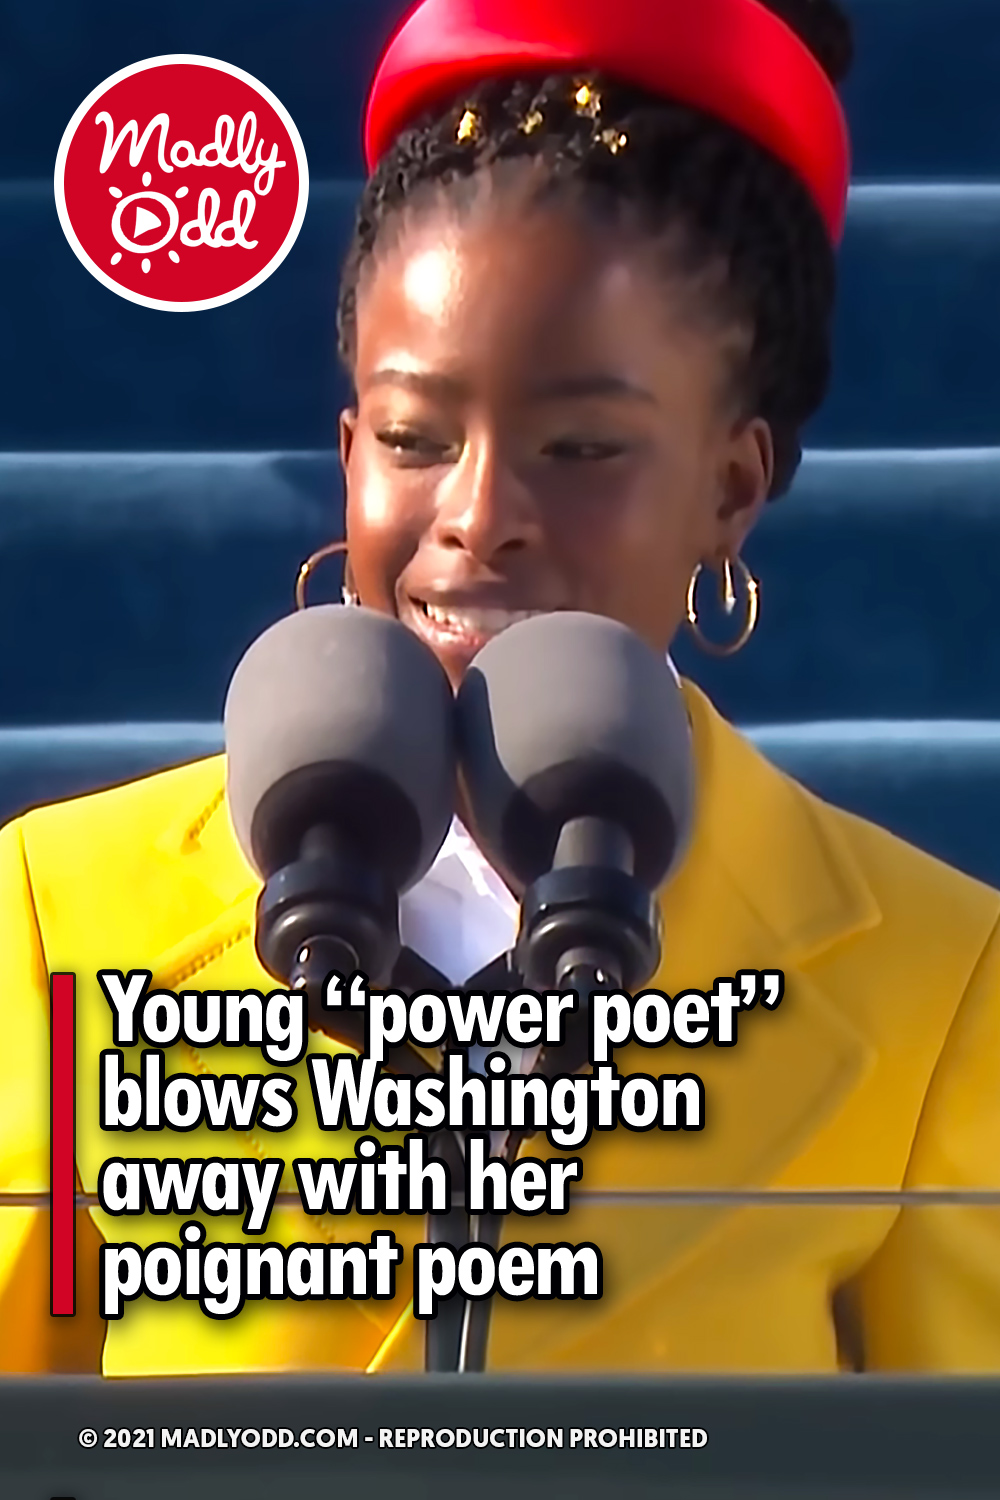 Young “power poet” blows Washington away with her poignant poem